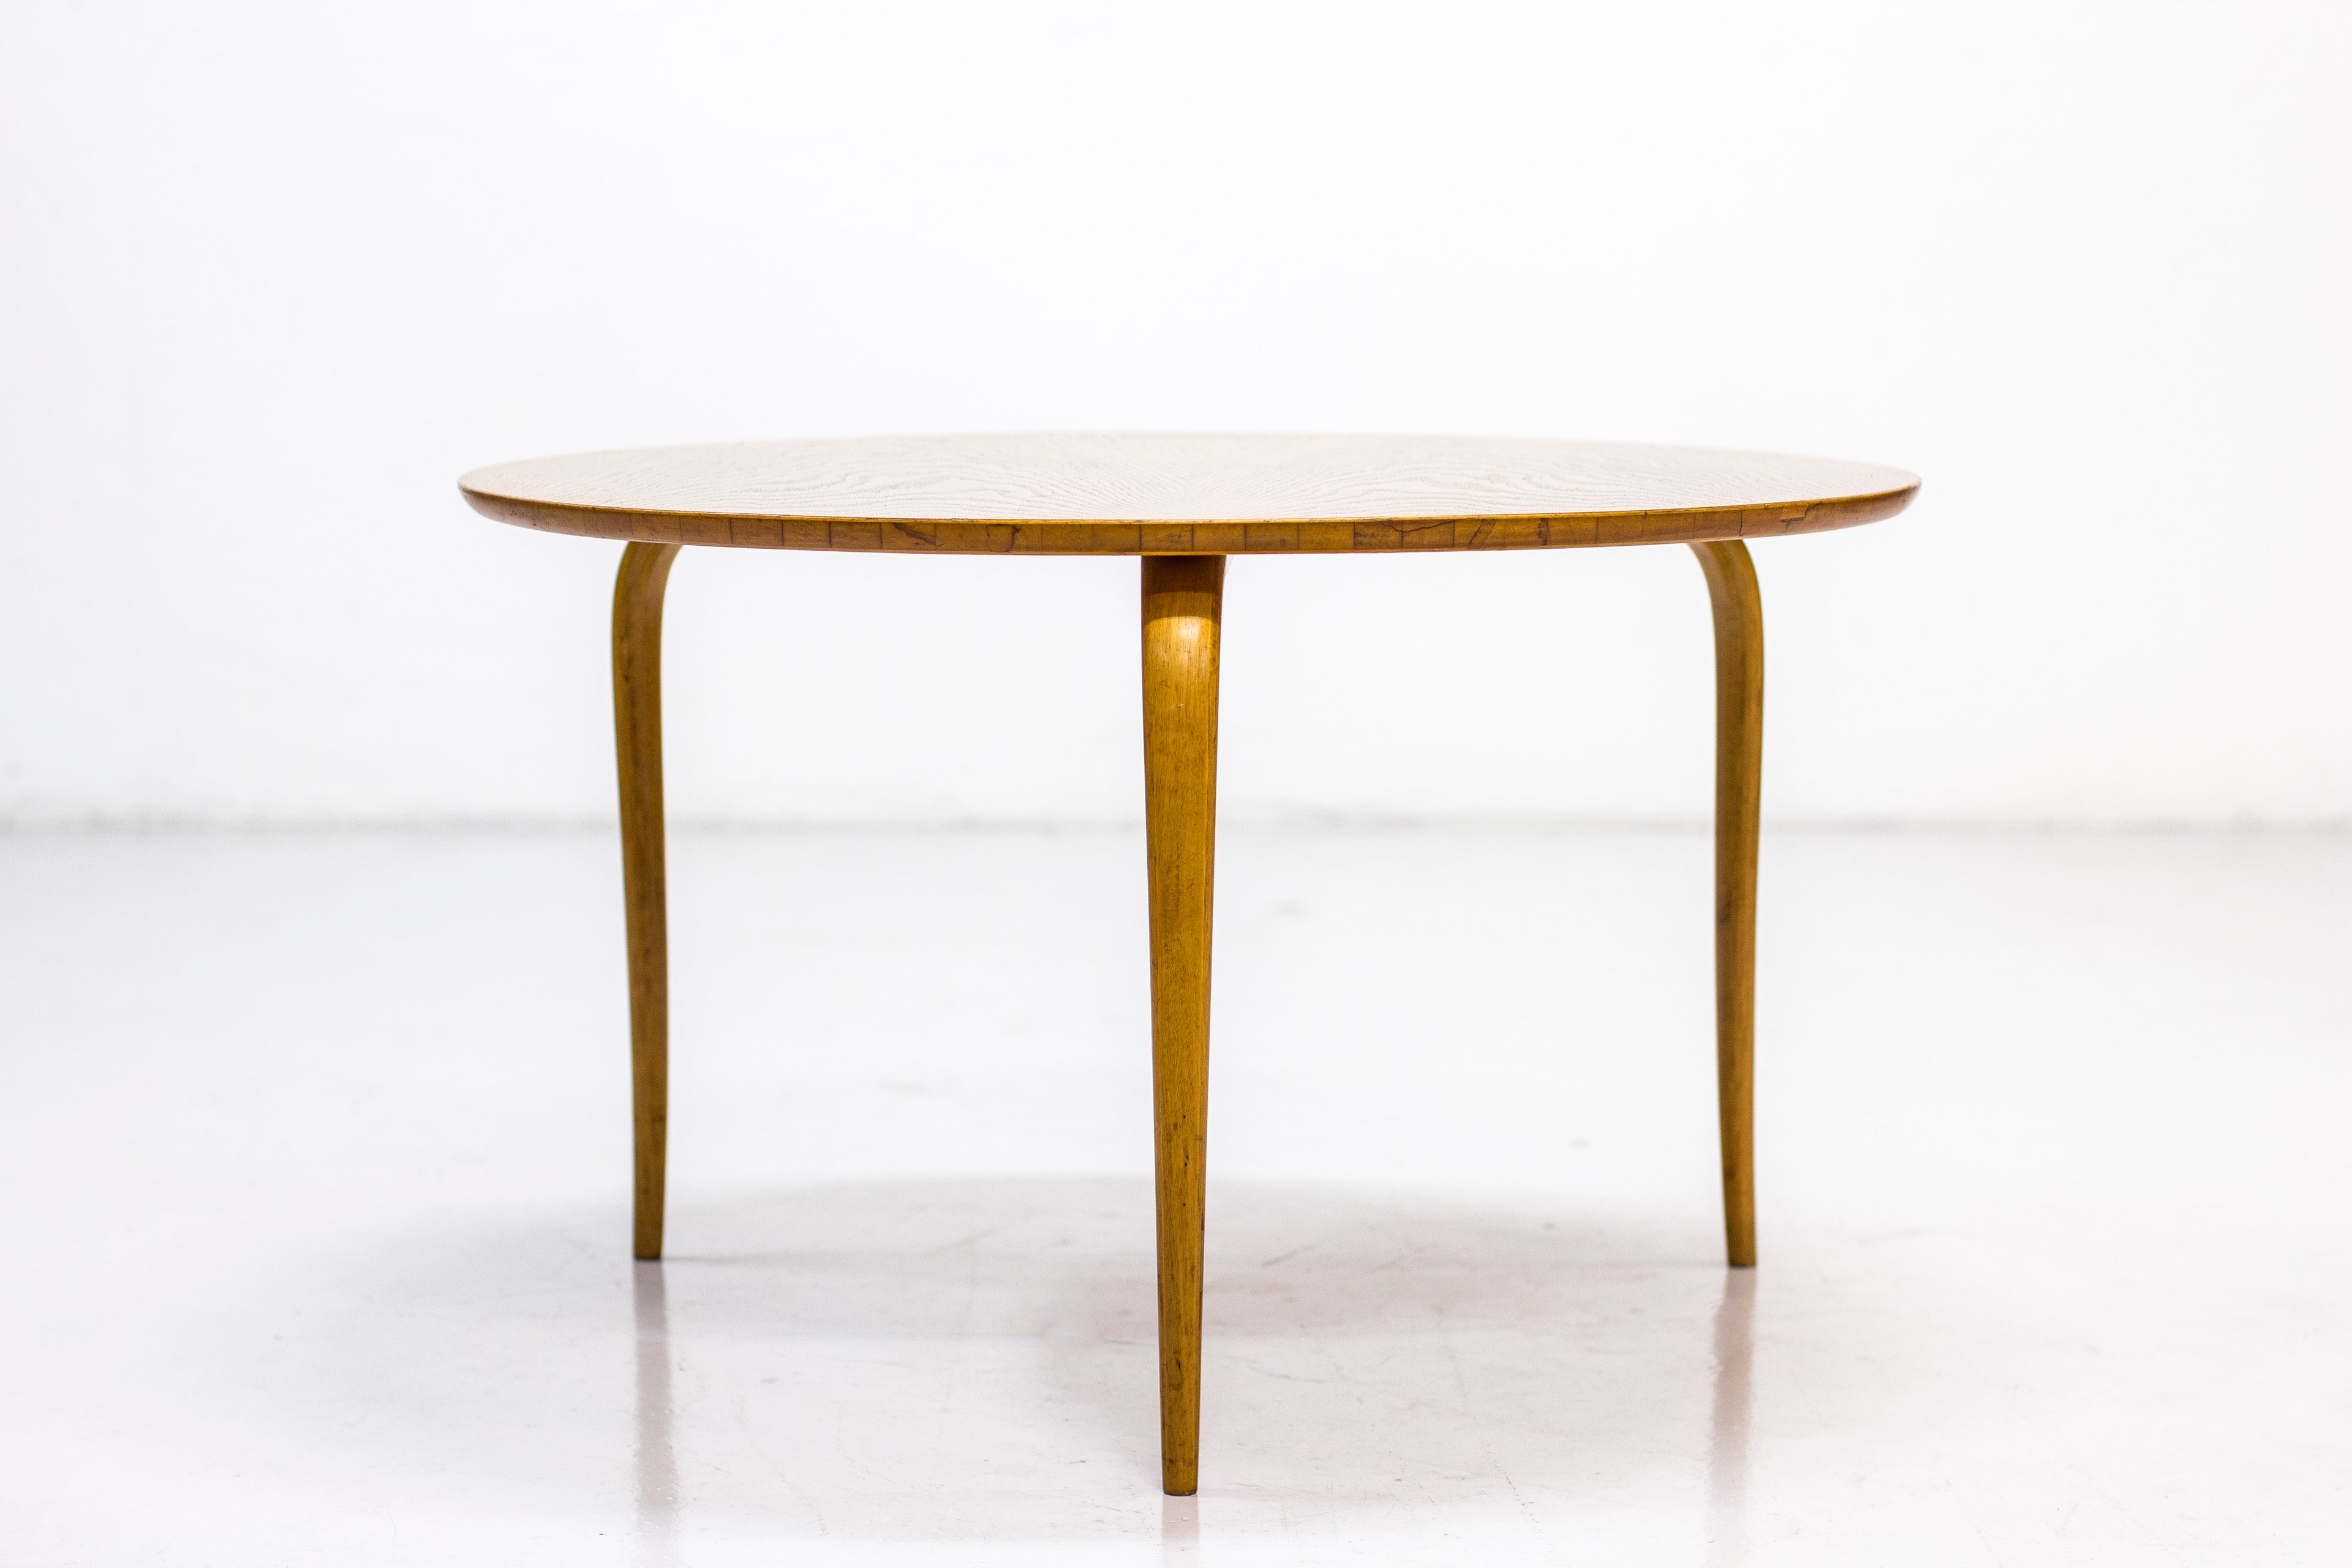 Occasional Table “Annika” by Bruno Mathsson